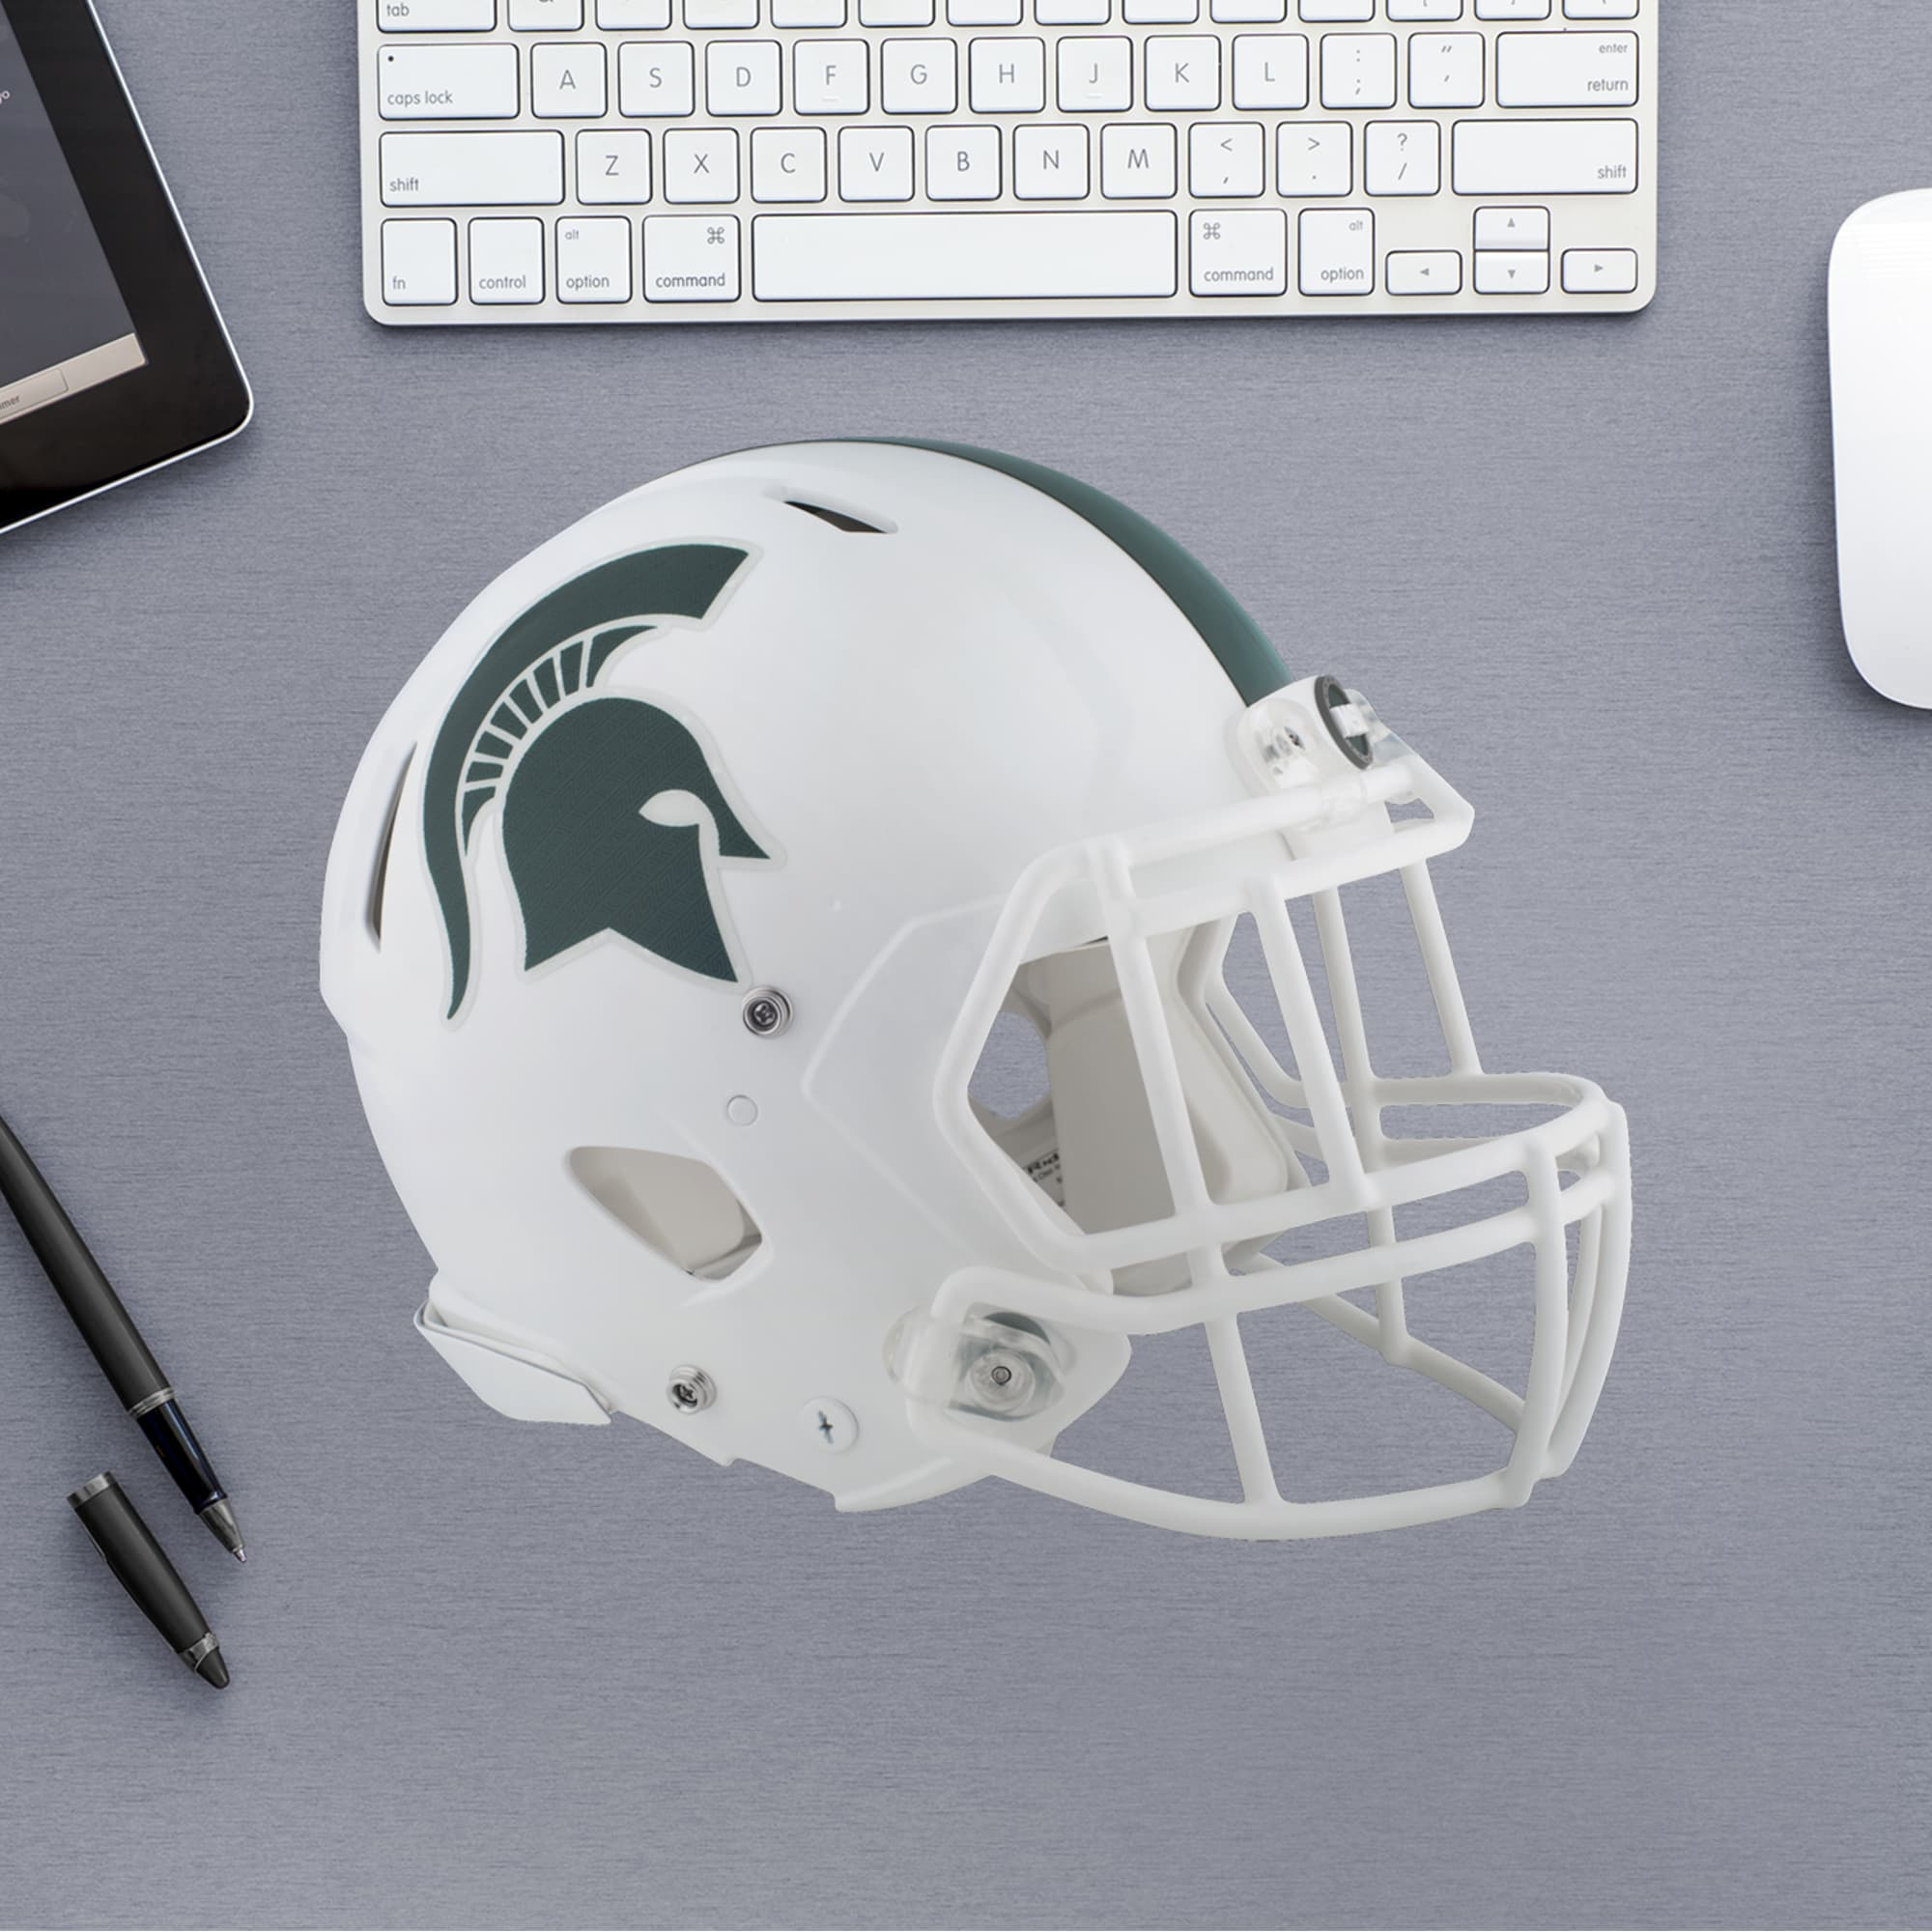 Michigan State Spartans: White Helmet - Officially Licensed Removable Wall Decal 11.5"W x 9.5"H by Fathead | Vinyl